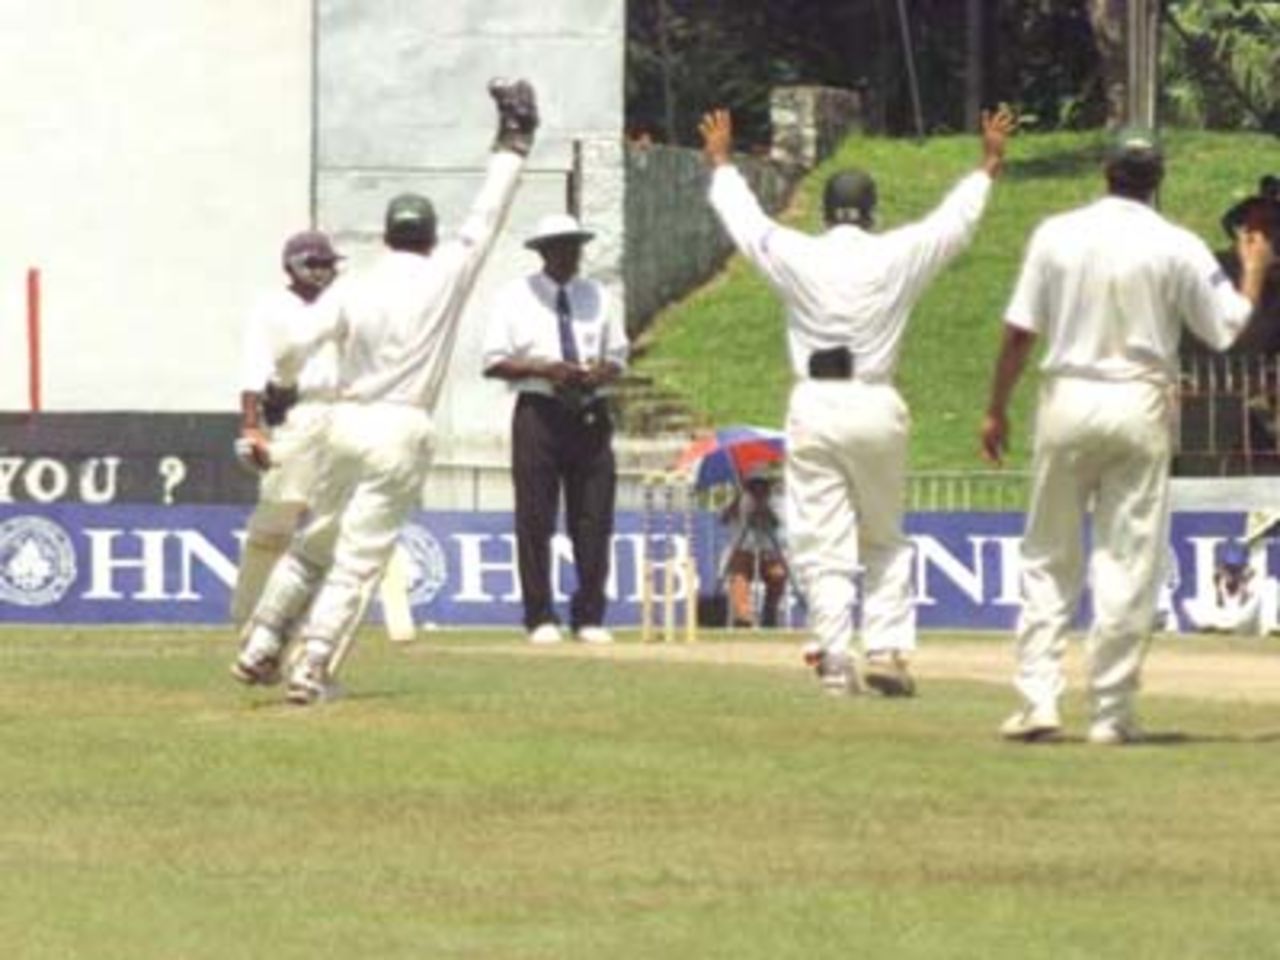 Pakistanis plead with Bucknor to no avail on the second day of the First Test, 15 June, 2000. Pakistan in Sri Lanka, Sinhalese Sports Club Ground, Colombo, 14-18 June 2000